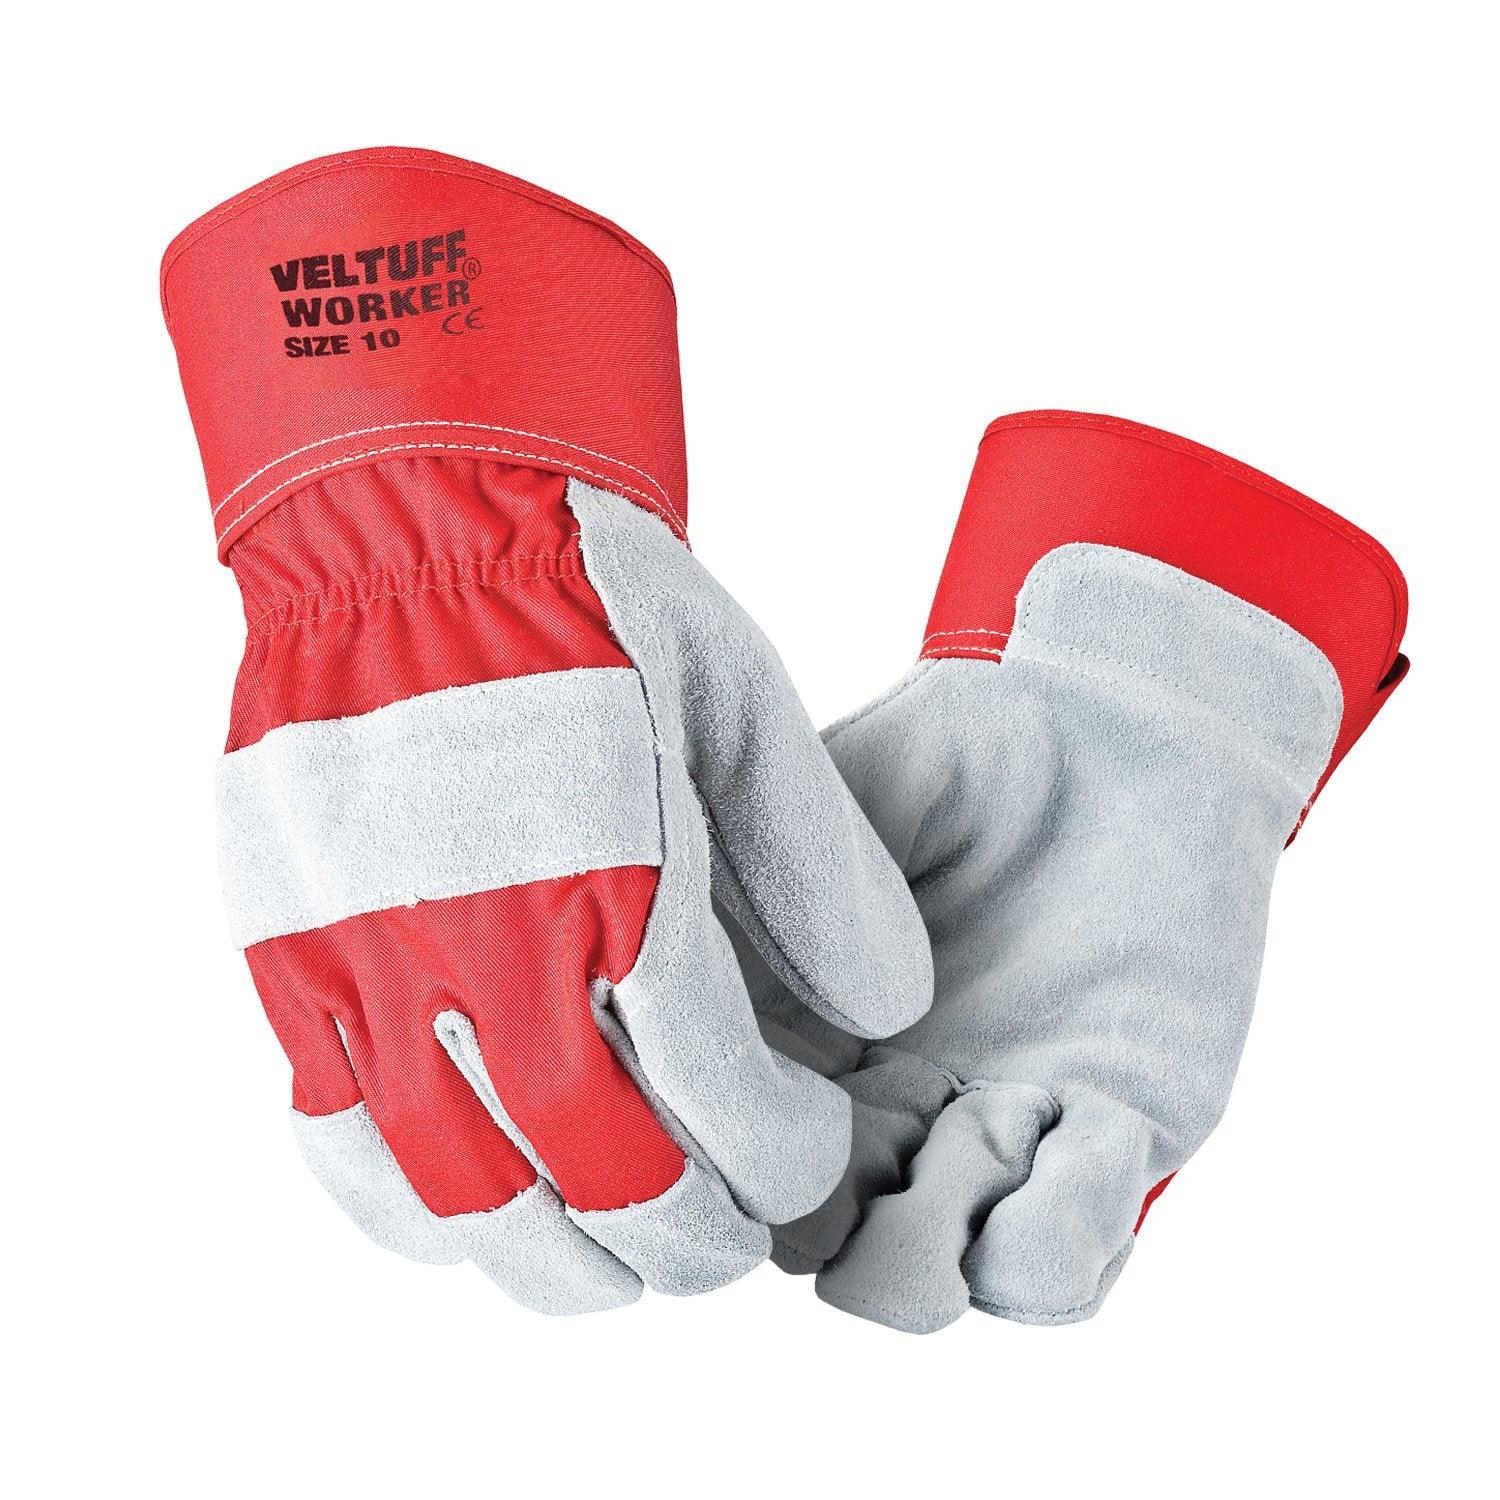 DIRTY RIGGER® ARMORDILLO GLOVES – StageEquip Pte Ltd